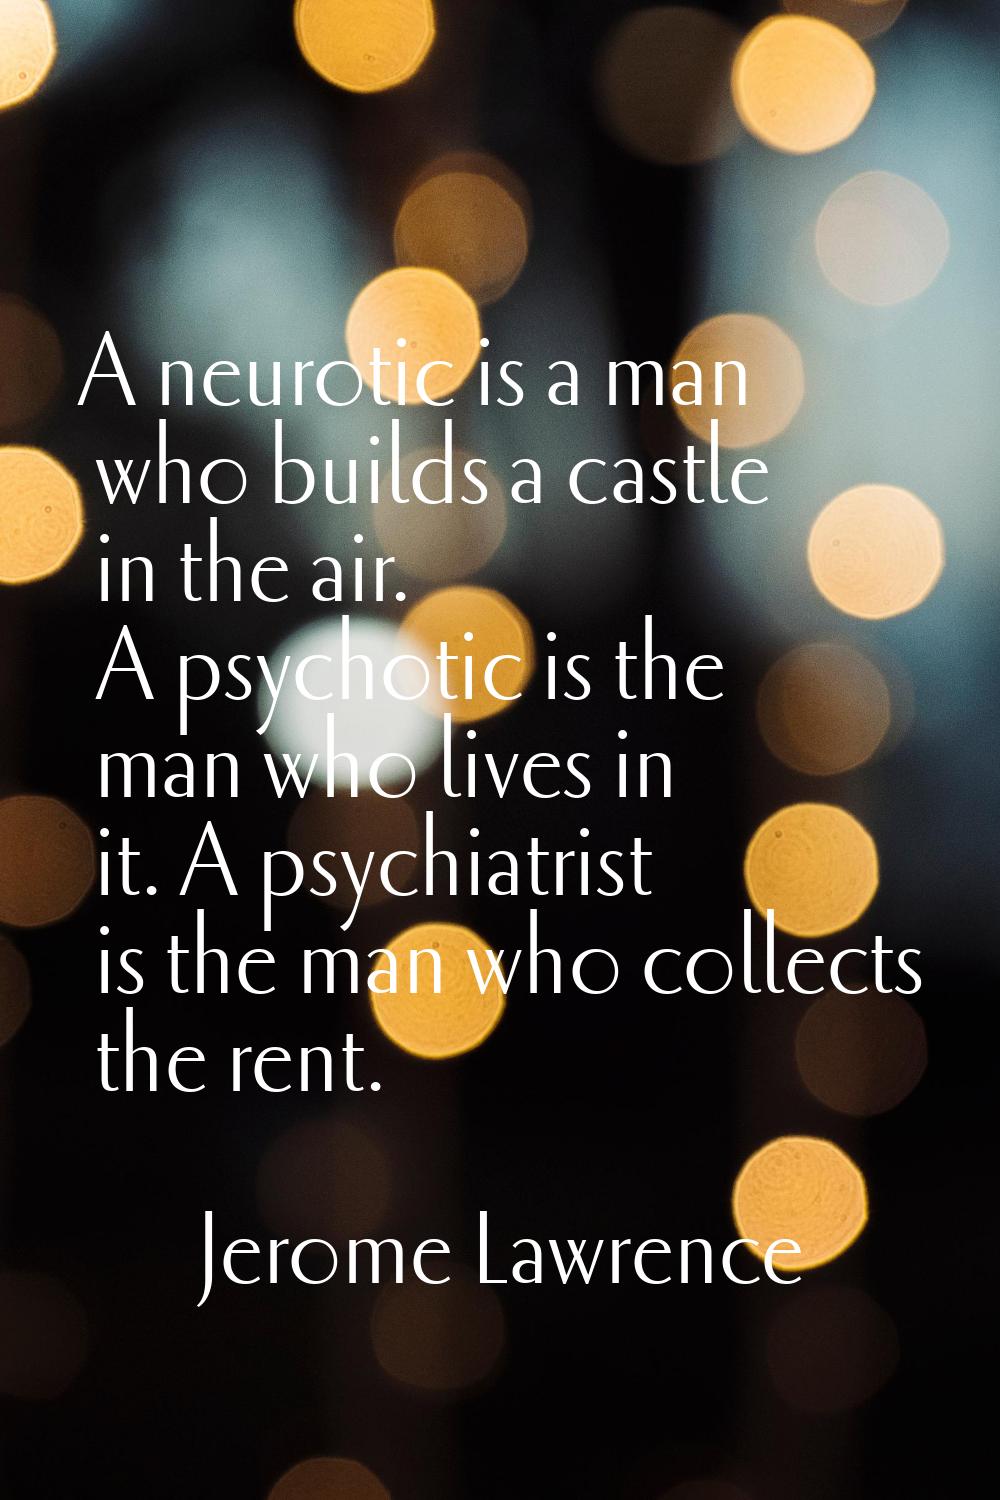 A neurotic is a man who builds a castle in the air. A psychotic is the man who lives in it. A psych